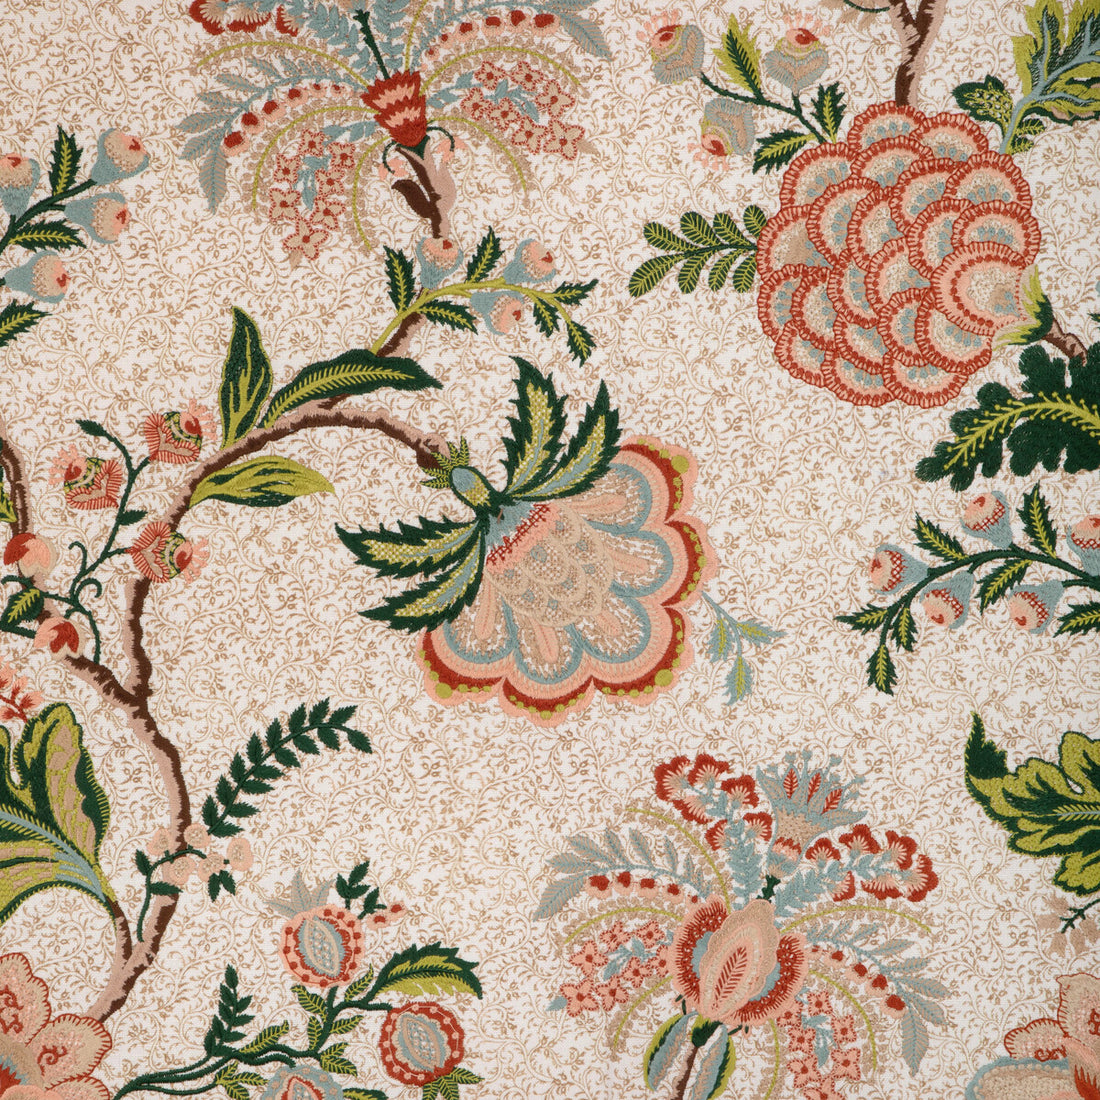 Anduze Emb fabric in apricot/sage color - pattern 8023118.312.0 - by Brunschwig &amp; Fils in the Anduze Embroideries collection